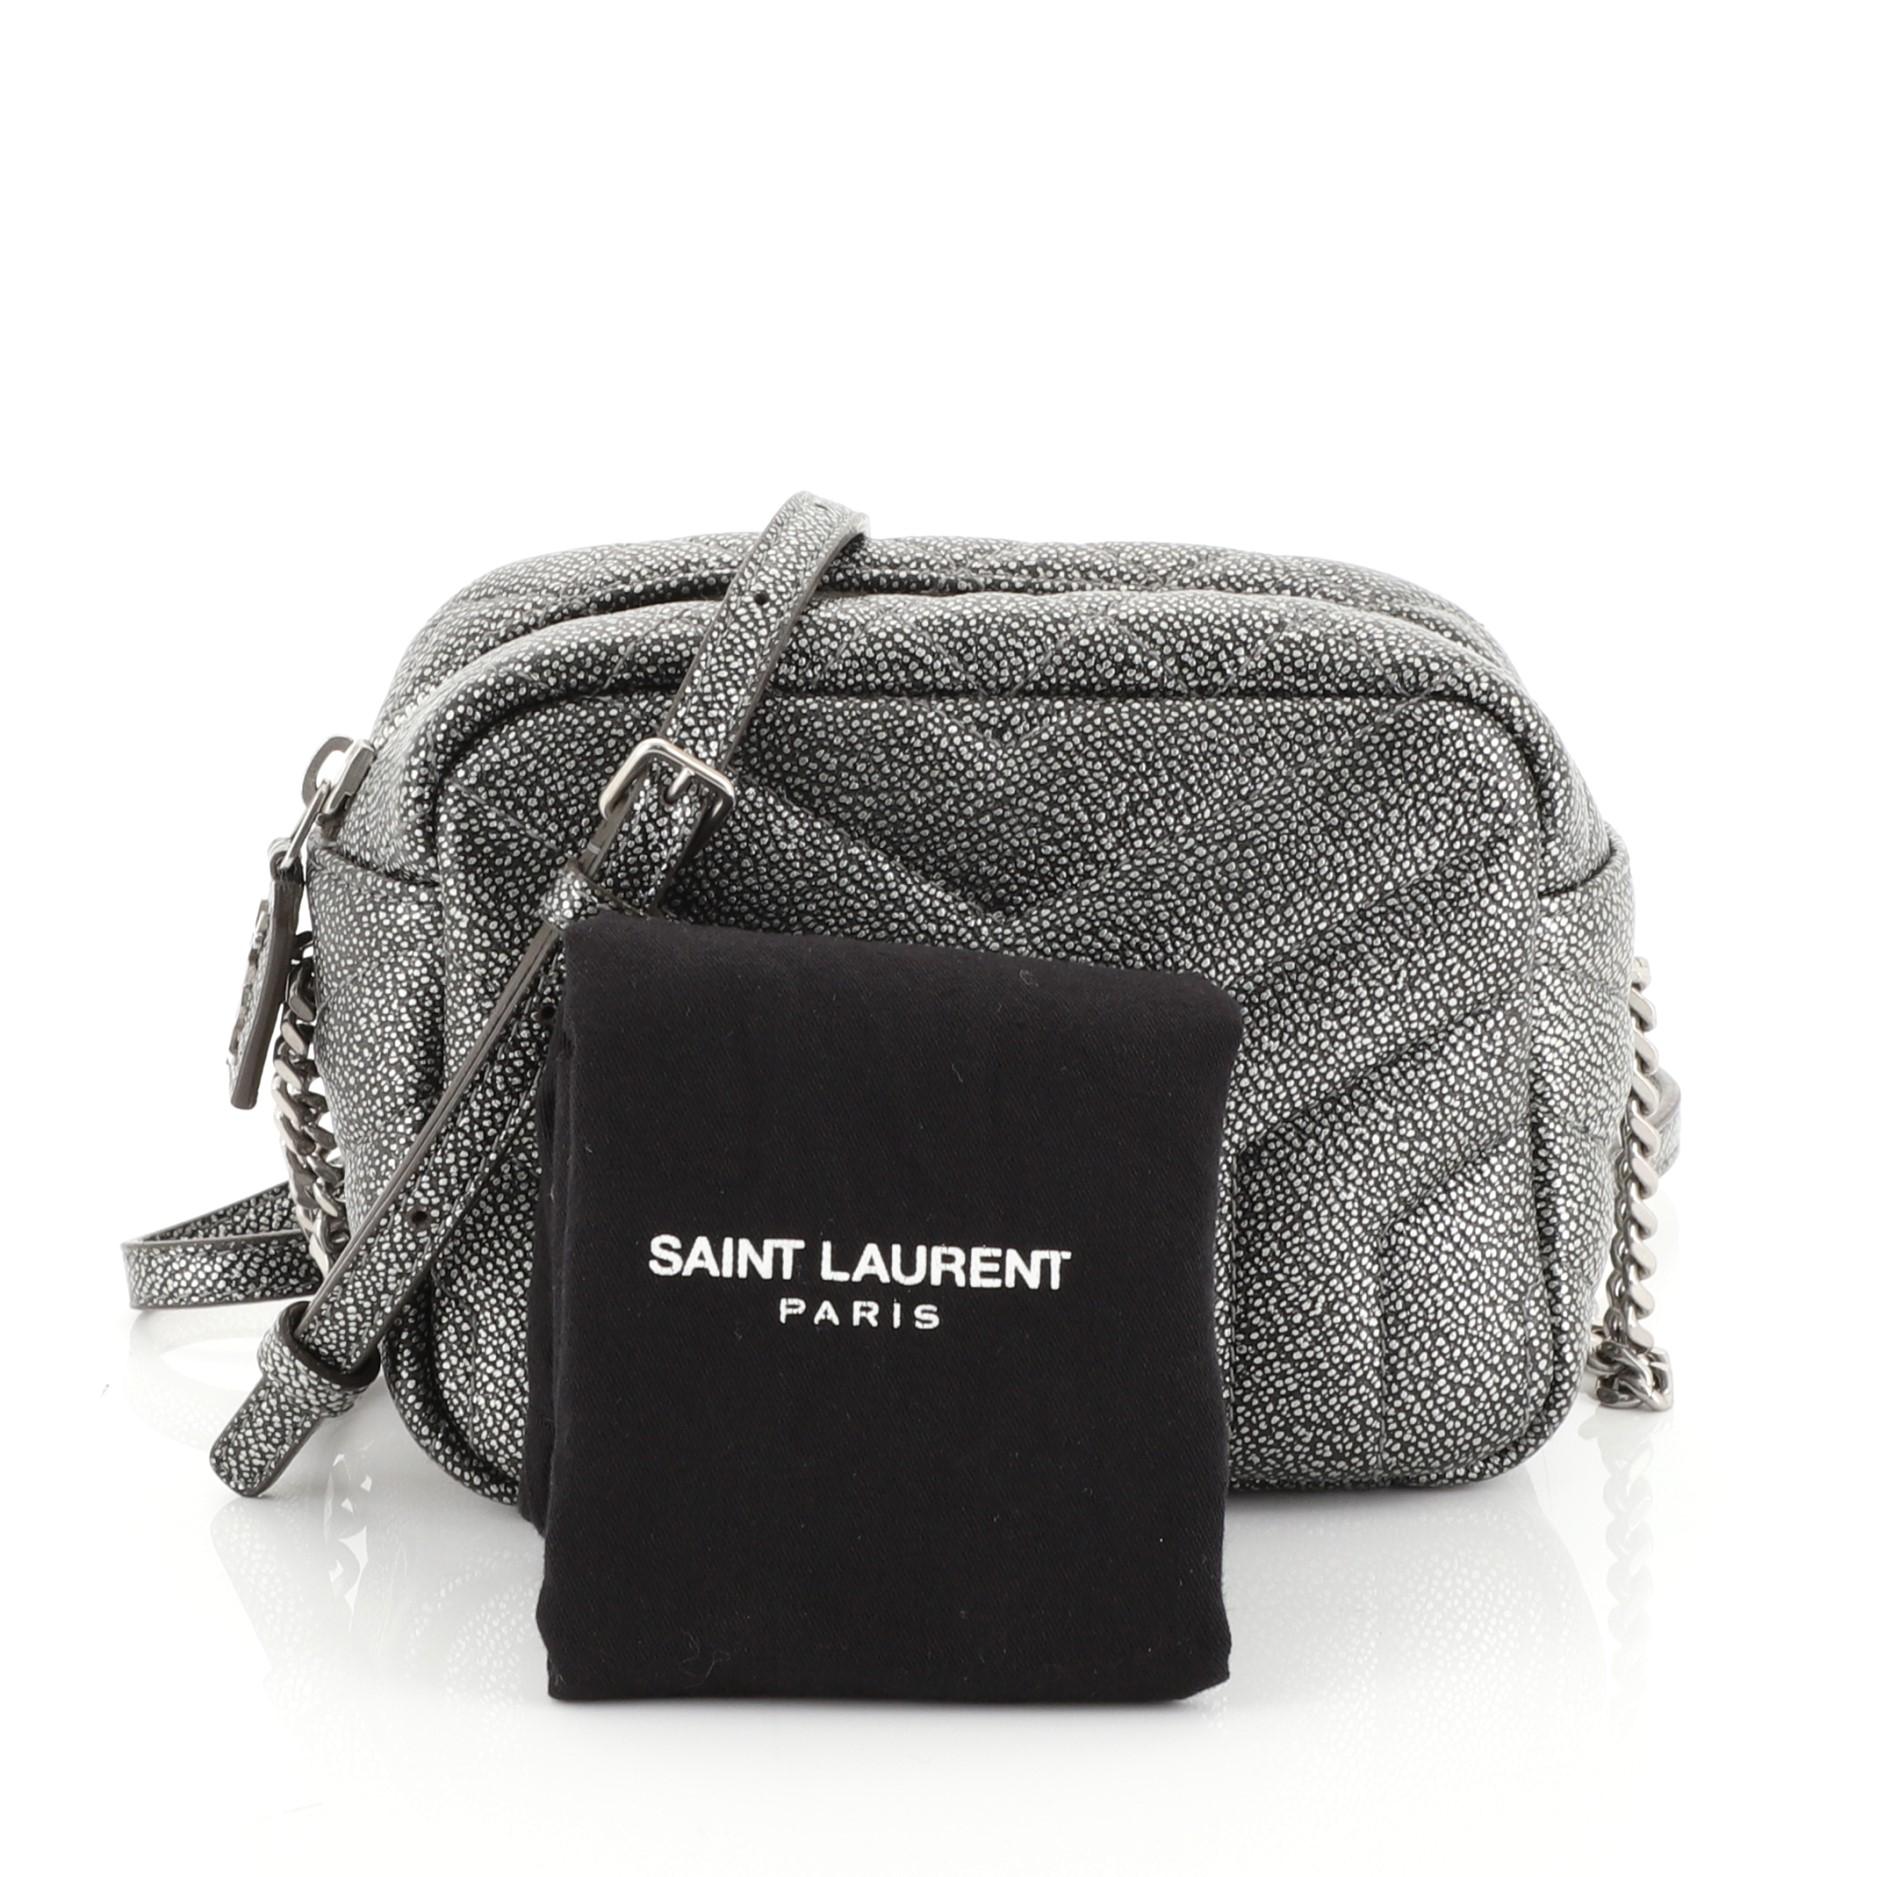 This Saint Laurent LouLou Bowling Bag Matelasse Chevron Leather Mini, crafted from gray matelasse chevron leather, features chain link strap with shoulder pad and aged silver-tone hardware. Its zip closure opens to a black fabric interior with slip